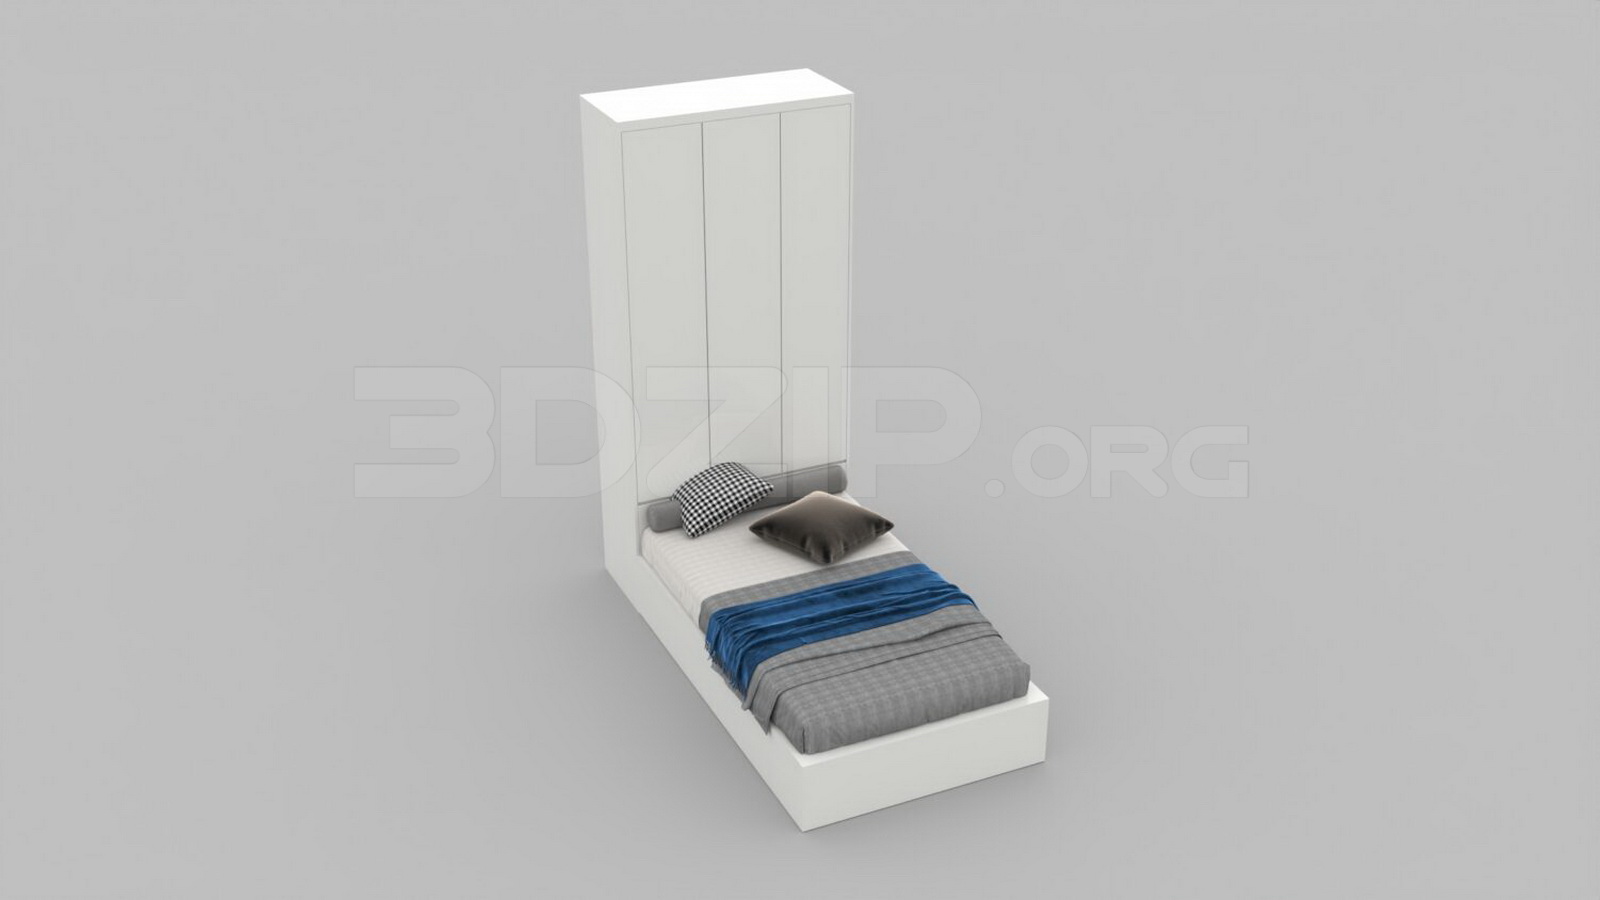 825. Download Free Bed Model By Nguyen Ngoc